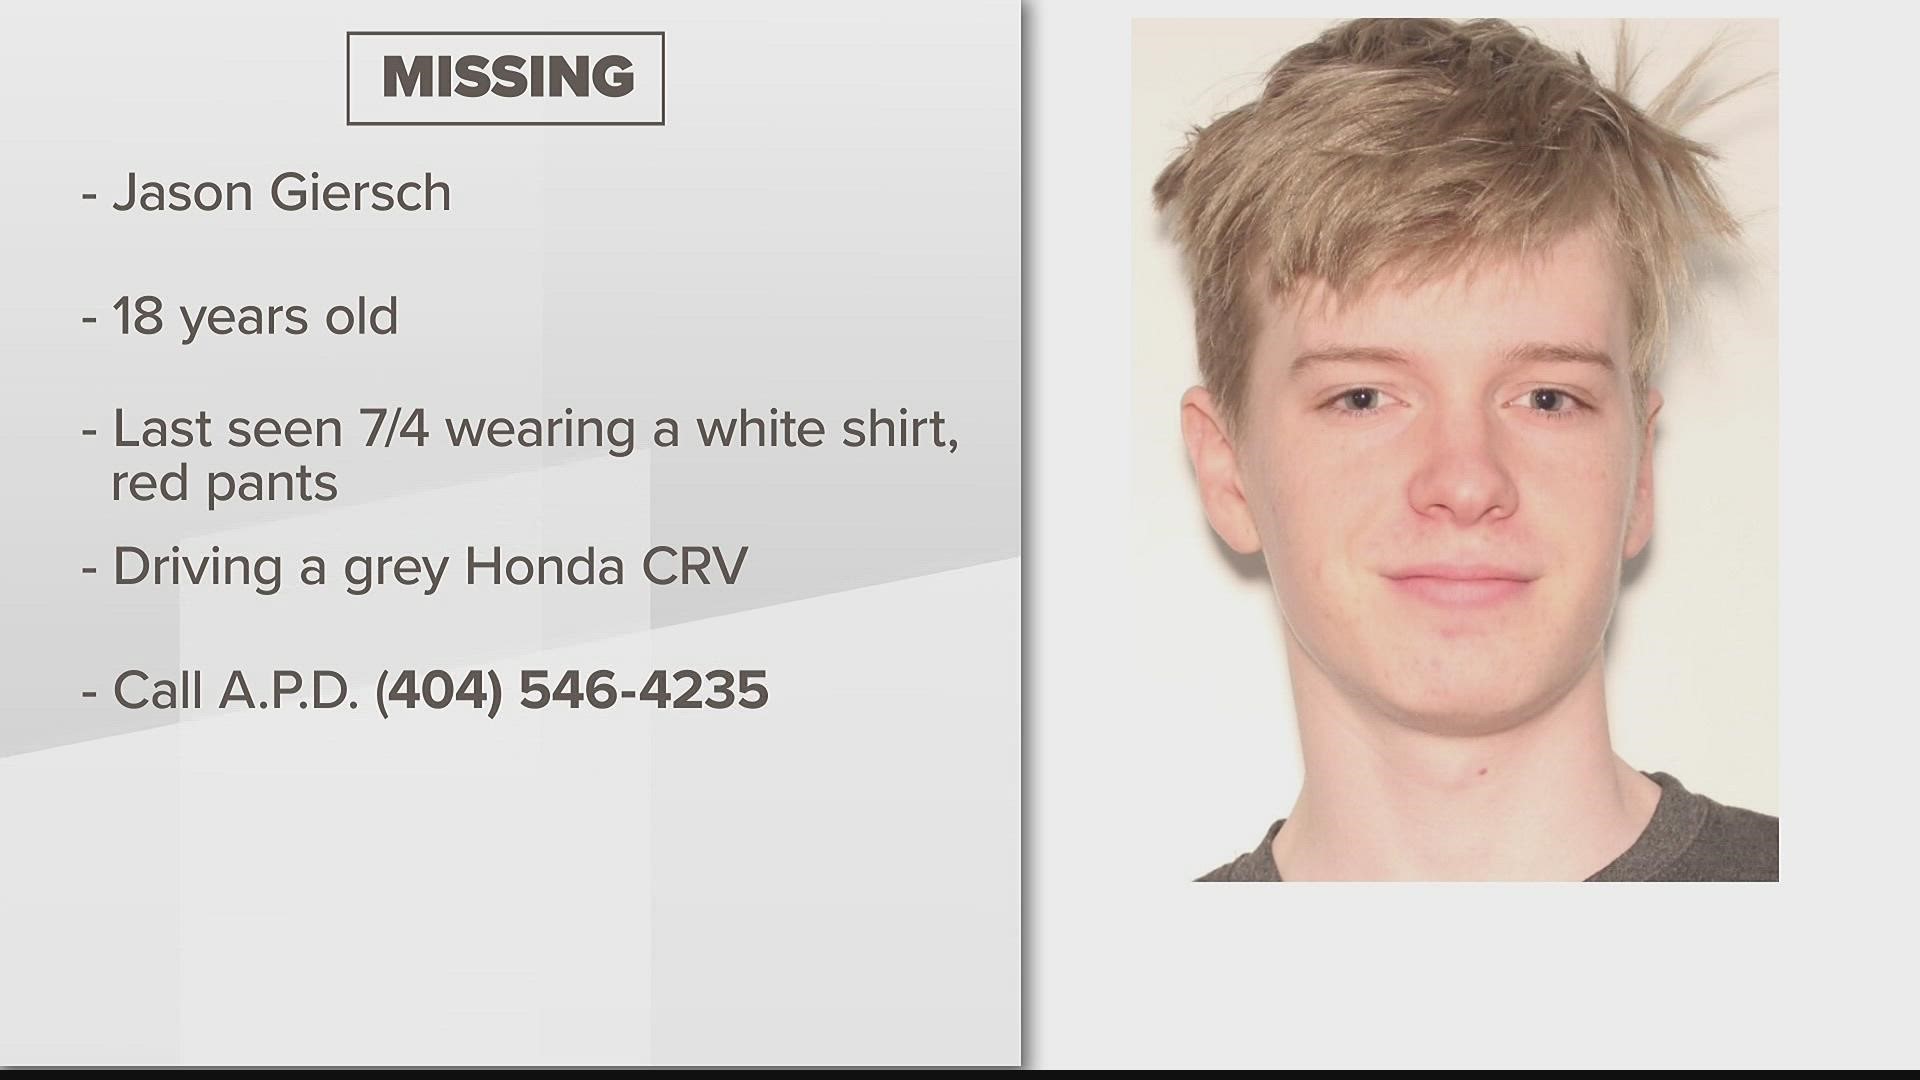 Atlanta Police need help as they try to find a teen who went missing over the Fourth of July holiday.